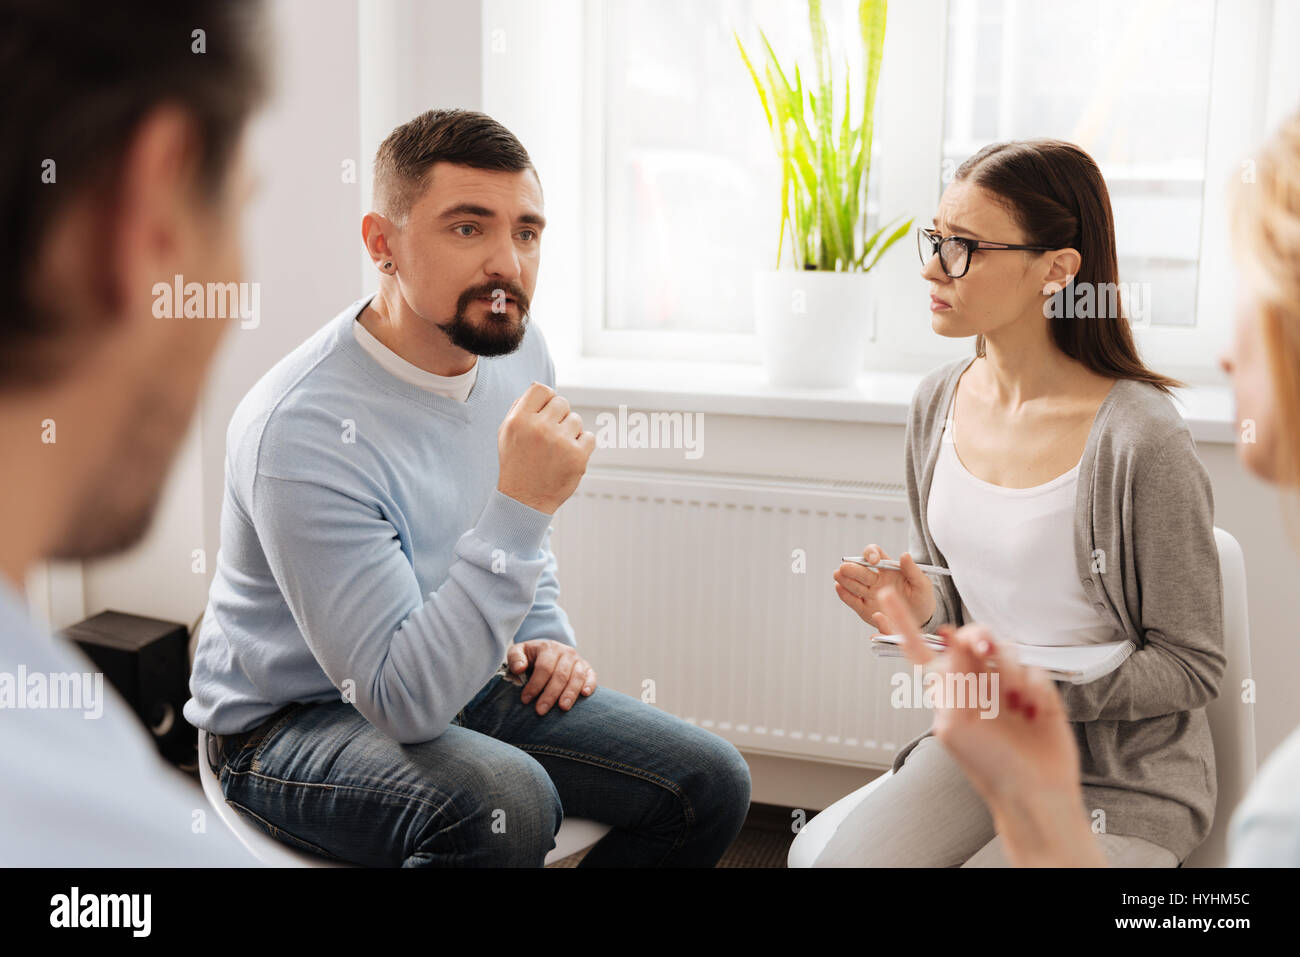 Resolute male person sharing his experience Stock Photo